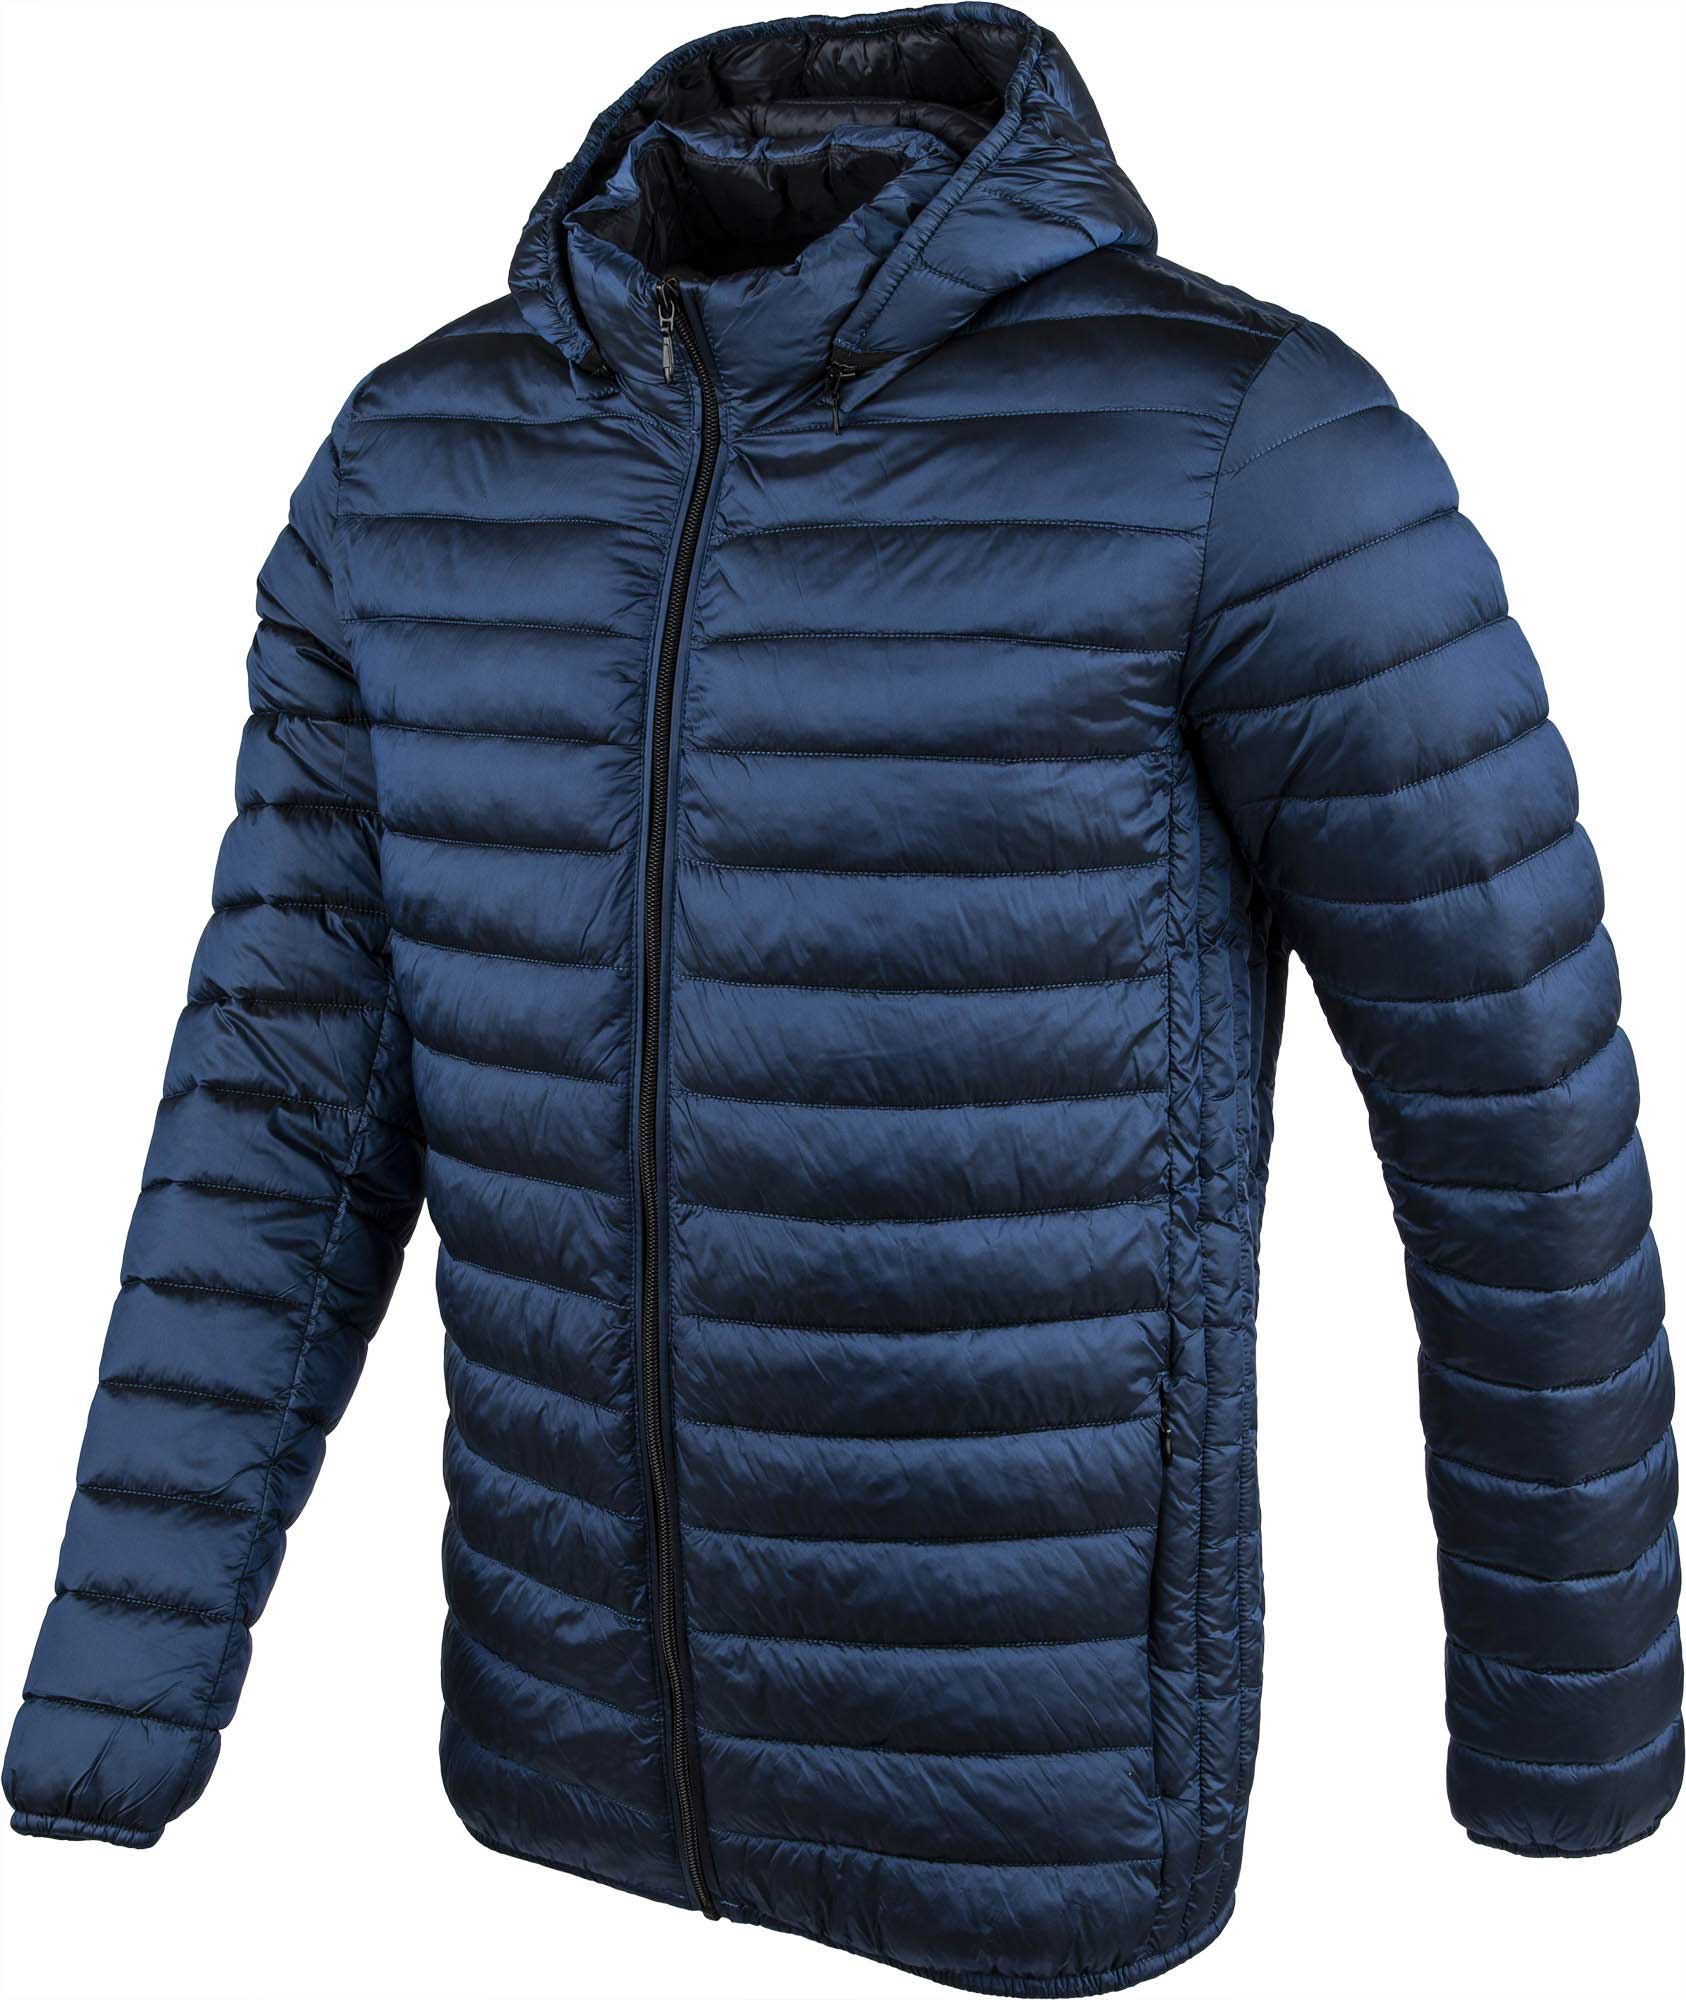 Men’s quilted sports jacket